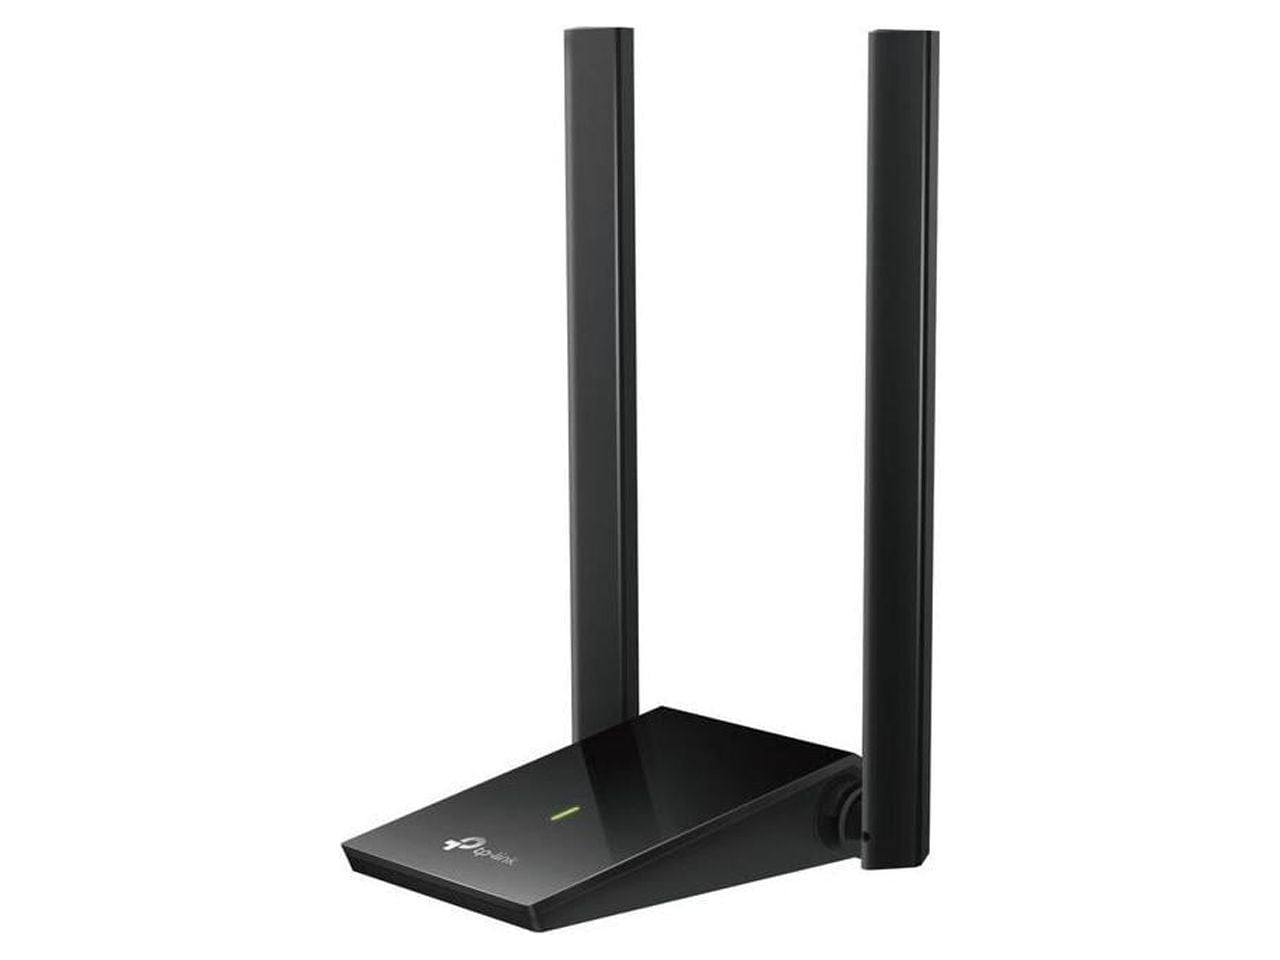 lytter Datter Løve TP-Link USB WiFi Adapter for PC (Archer T4U Plus)- AC1300Mbps Dual Band  Wireless Network Adapter for Desktop with 2.4GHz / 5GHz High Gain 5dBi  Antennas, Supports Windows 10/8.1/8/7, Mac OS - Walmart.com